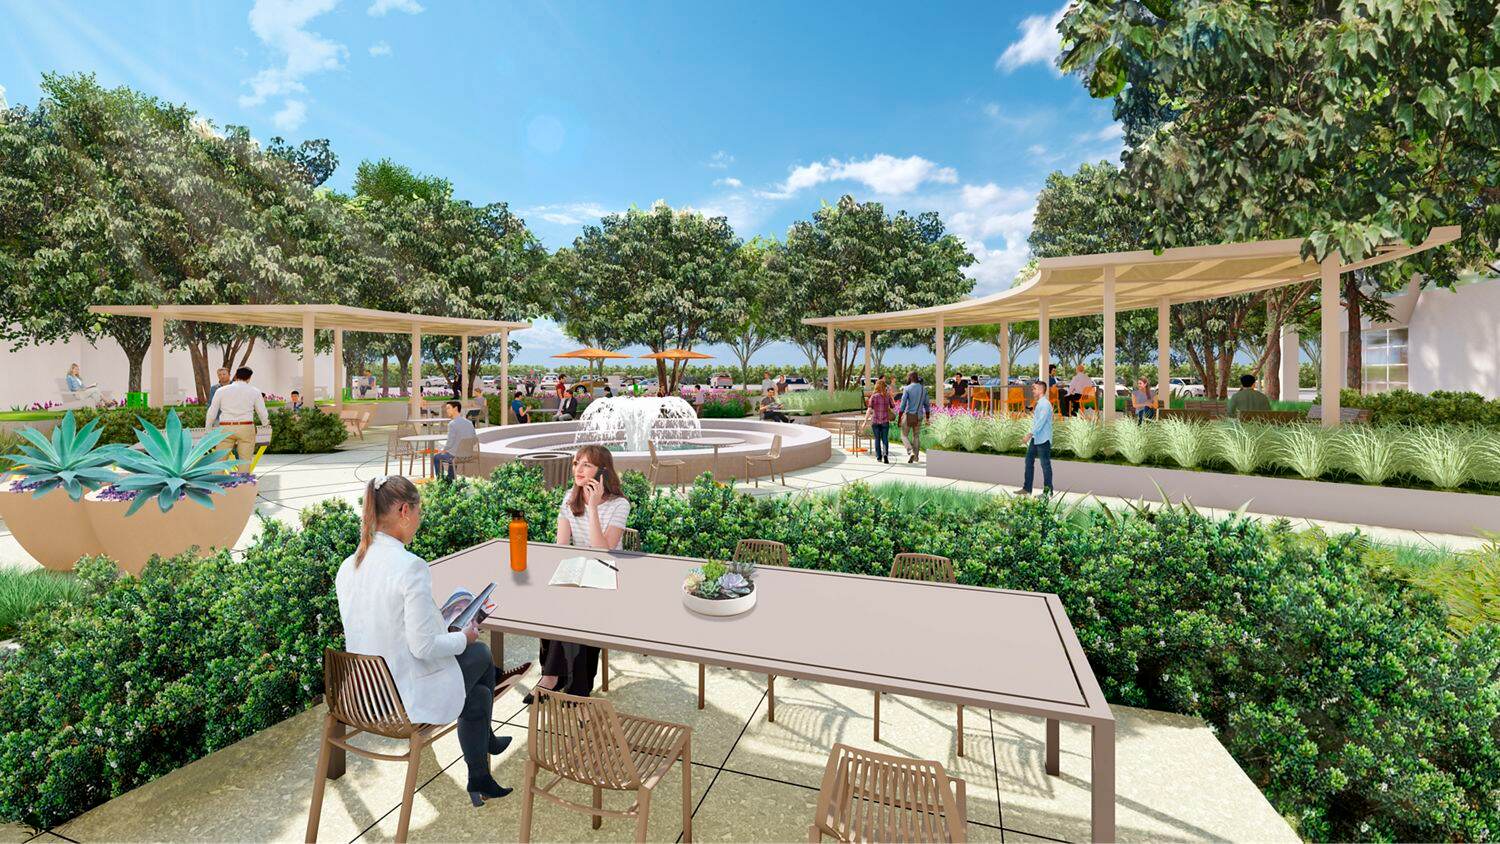 Renderings of The Commons outdoor workspace near Lakeview Business Center - 15300 Barranca Parkway in Irvine, CA.